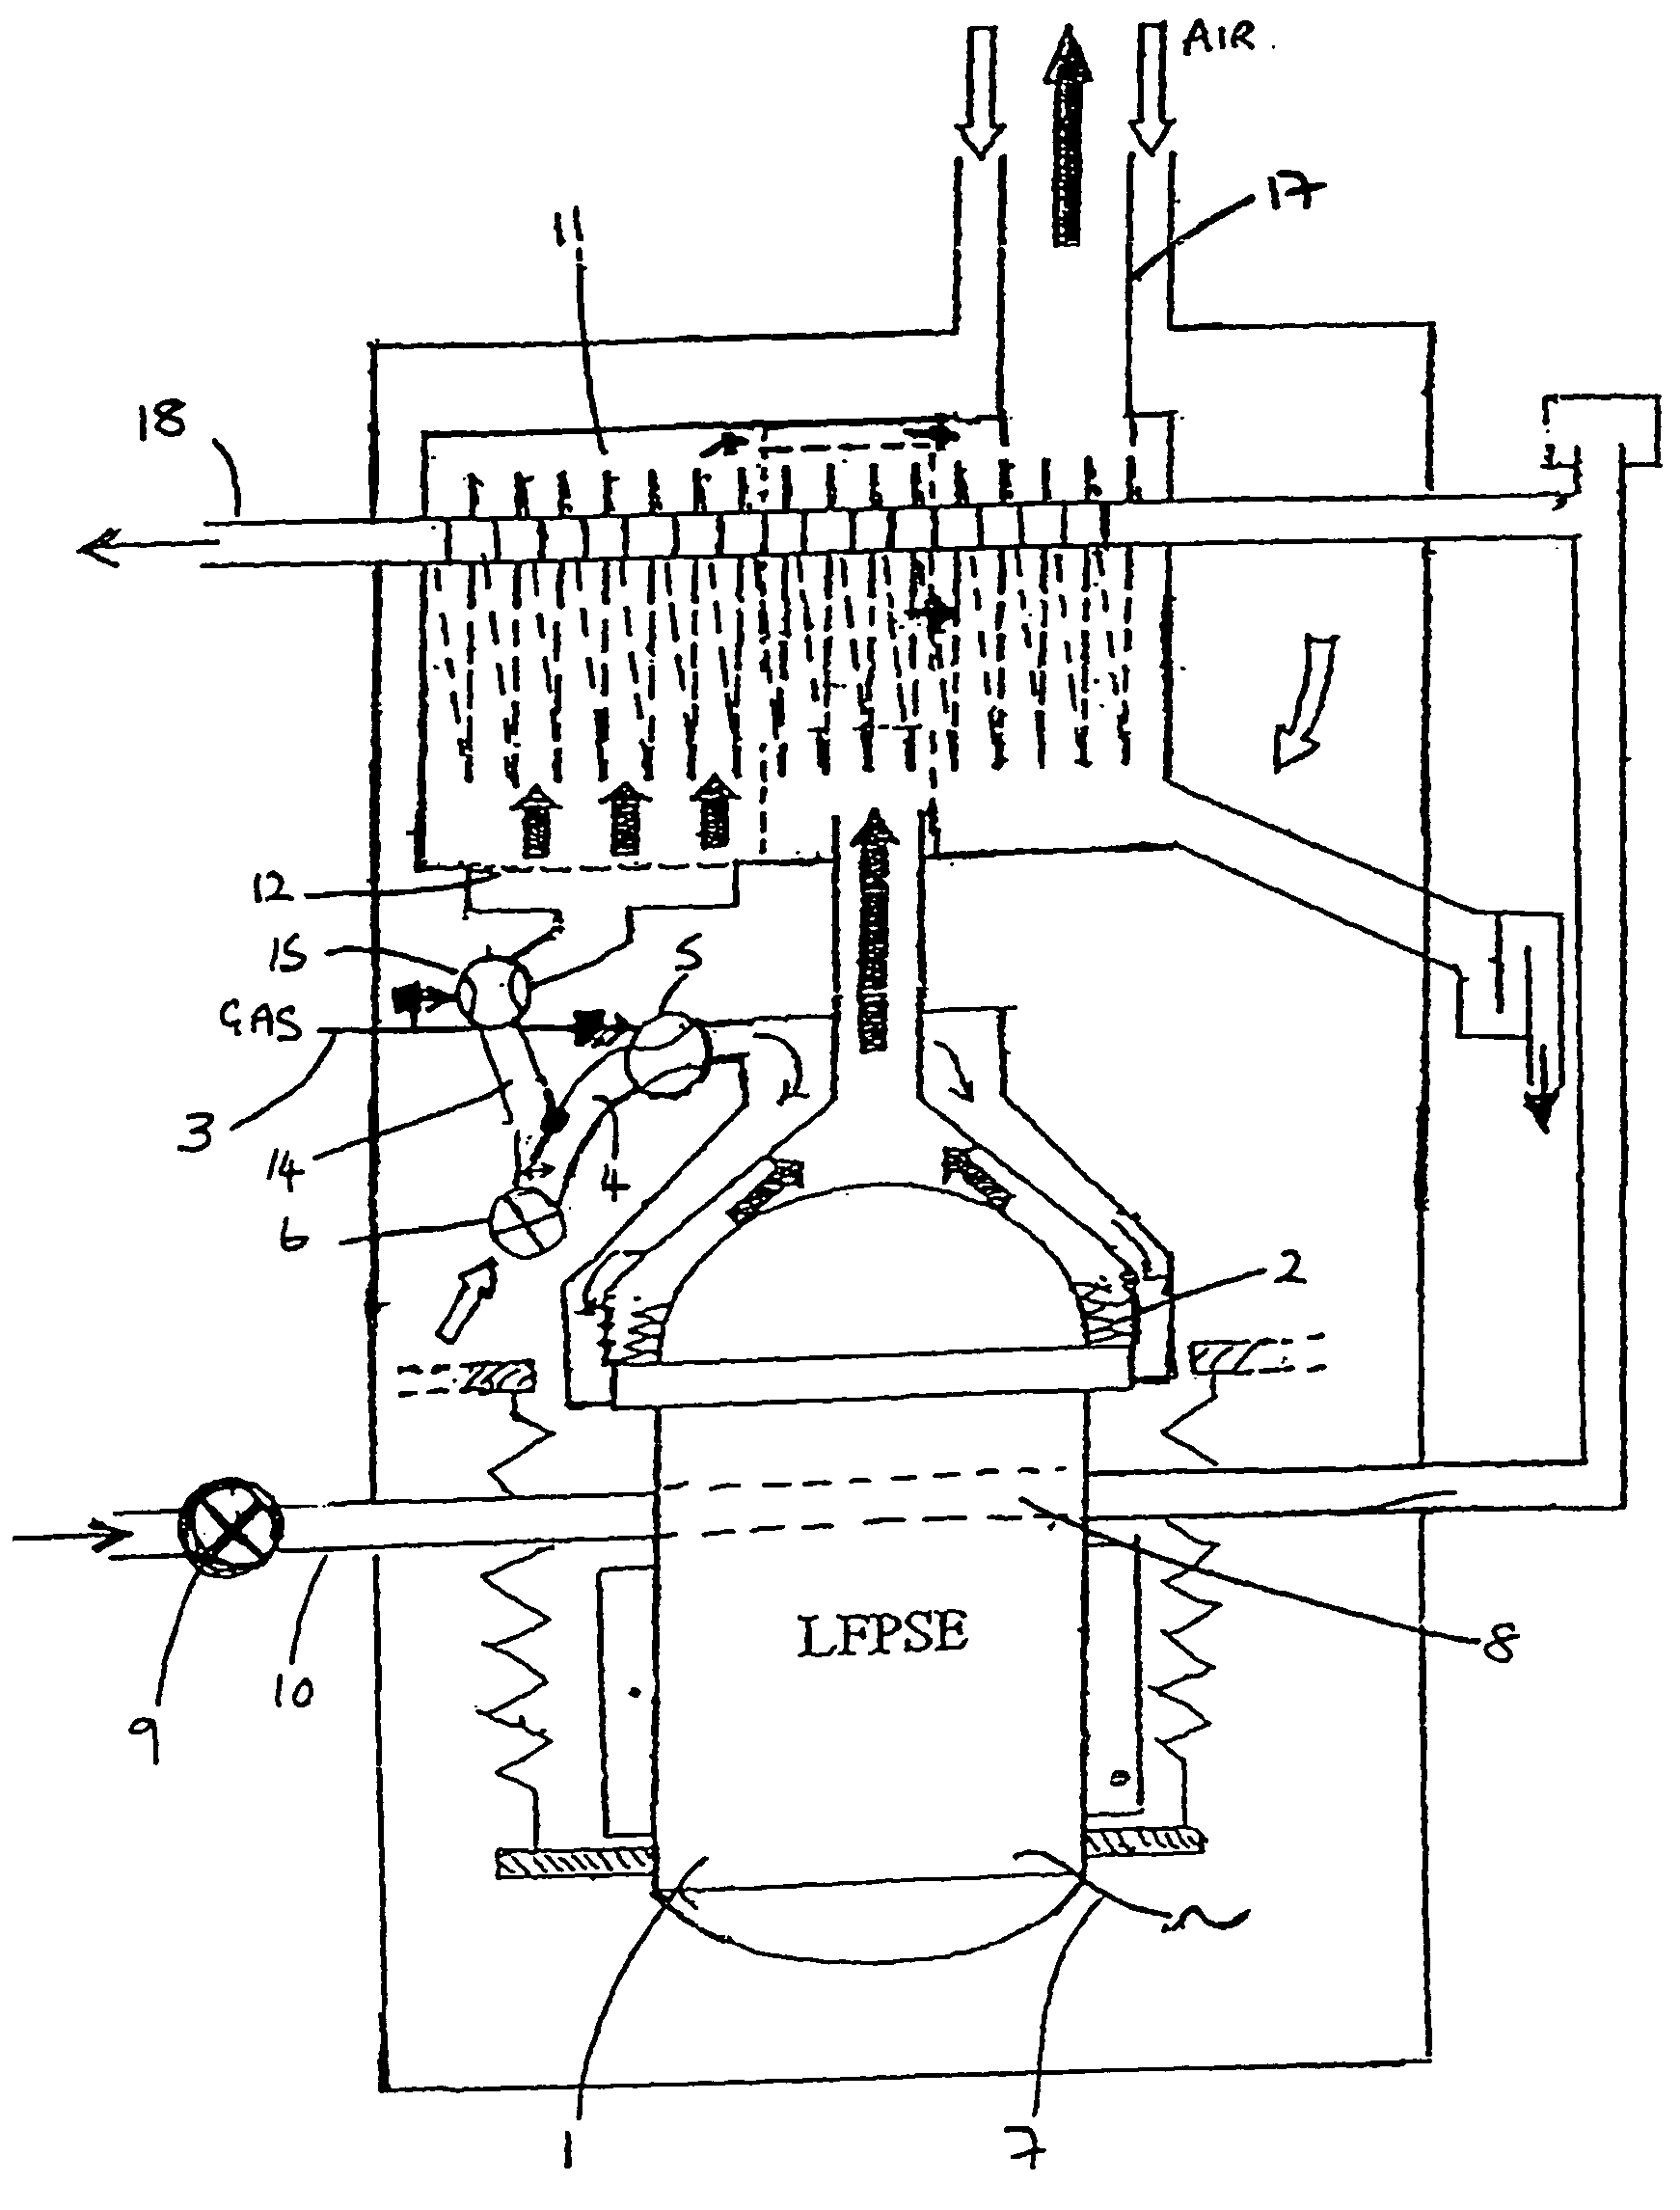 Domestic combined heat and power unit